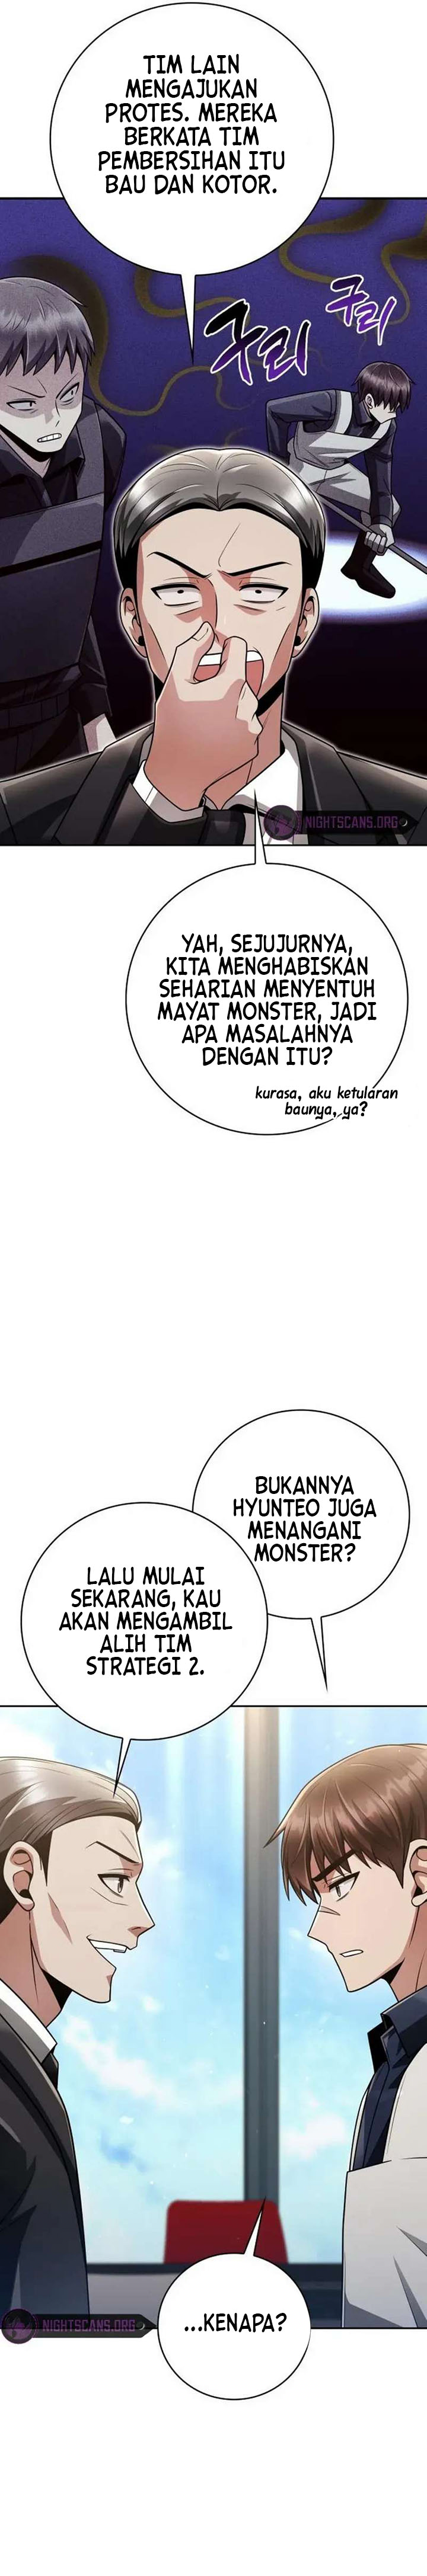 Dilarang COPAS - situs resmi www.mangacanblog.com - Komik clever cleaning life of the returned genius hunter 042 - chapter 42 43 Indonesia clever cleaning life of the returned genius hunter 042 - chapter 42 Terbaru 20|Baca Manga Komik Indonesia|Mangacan